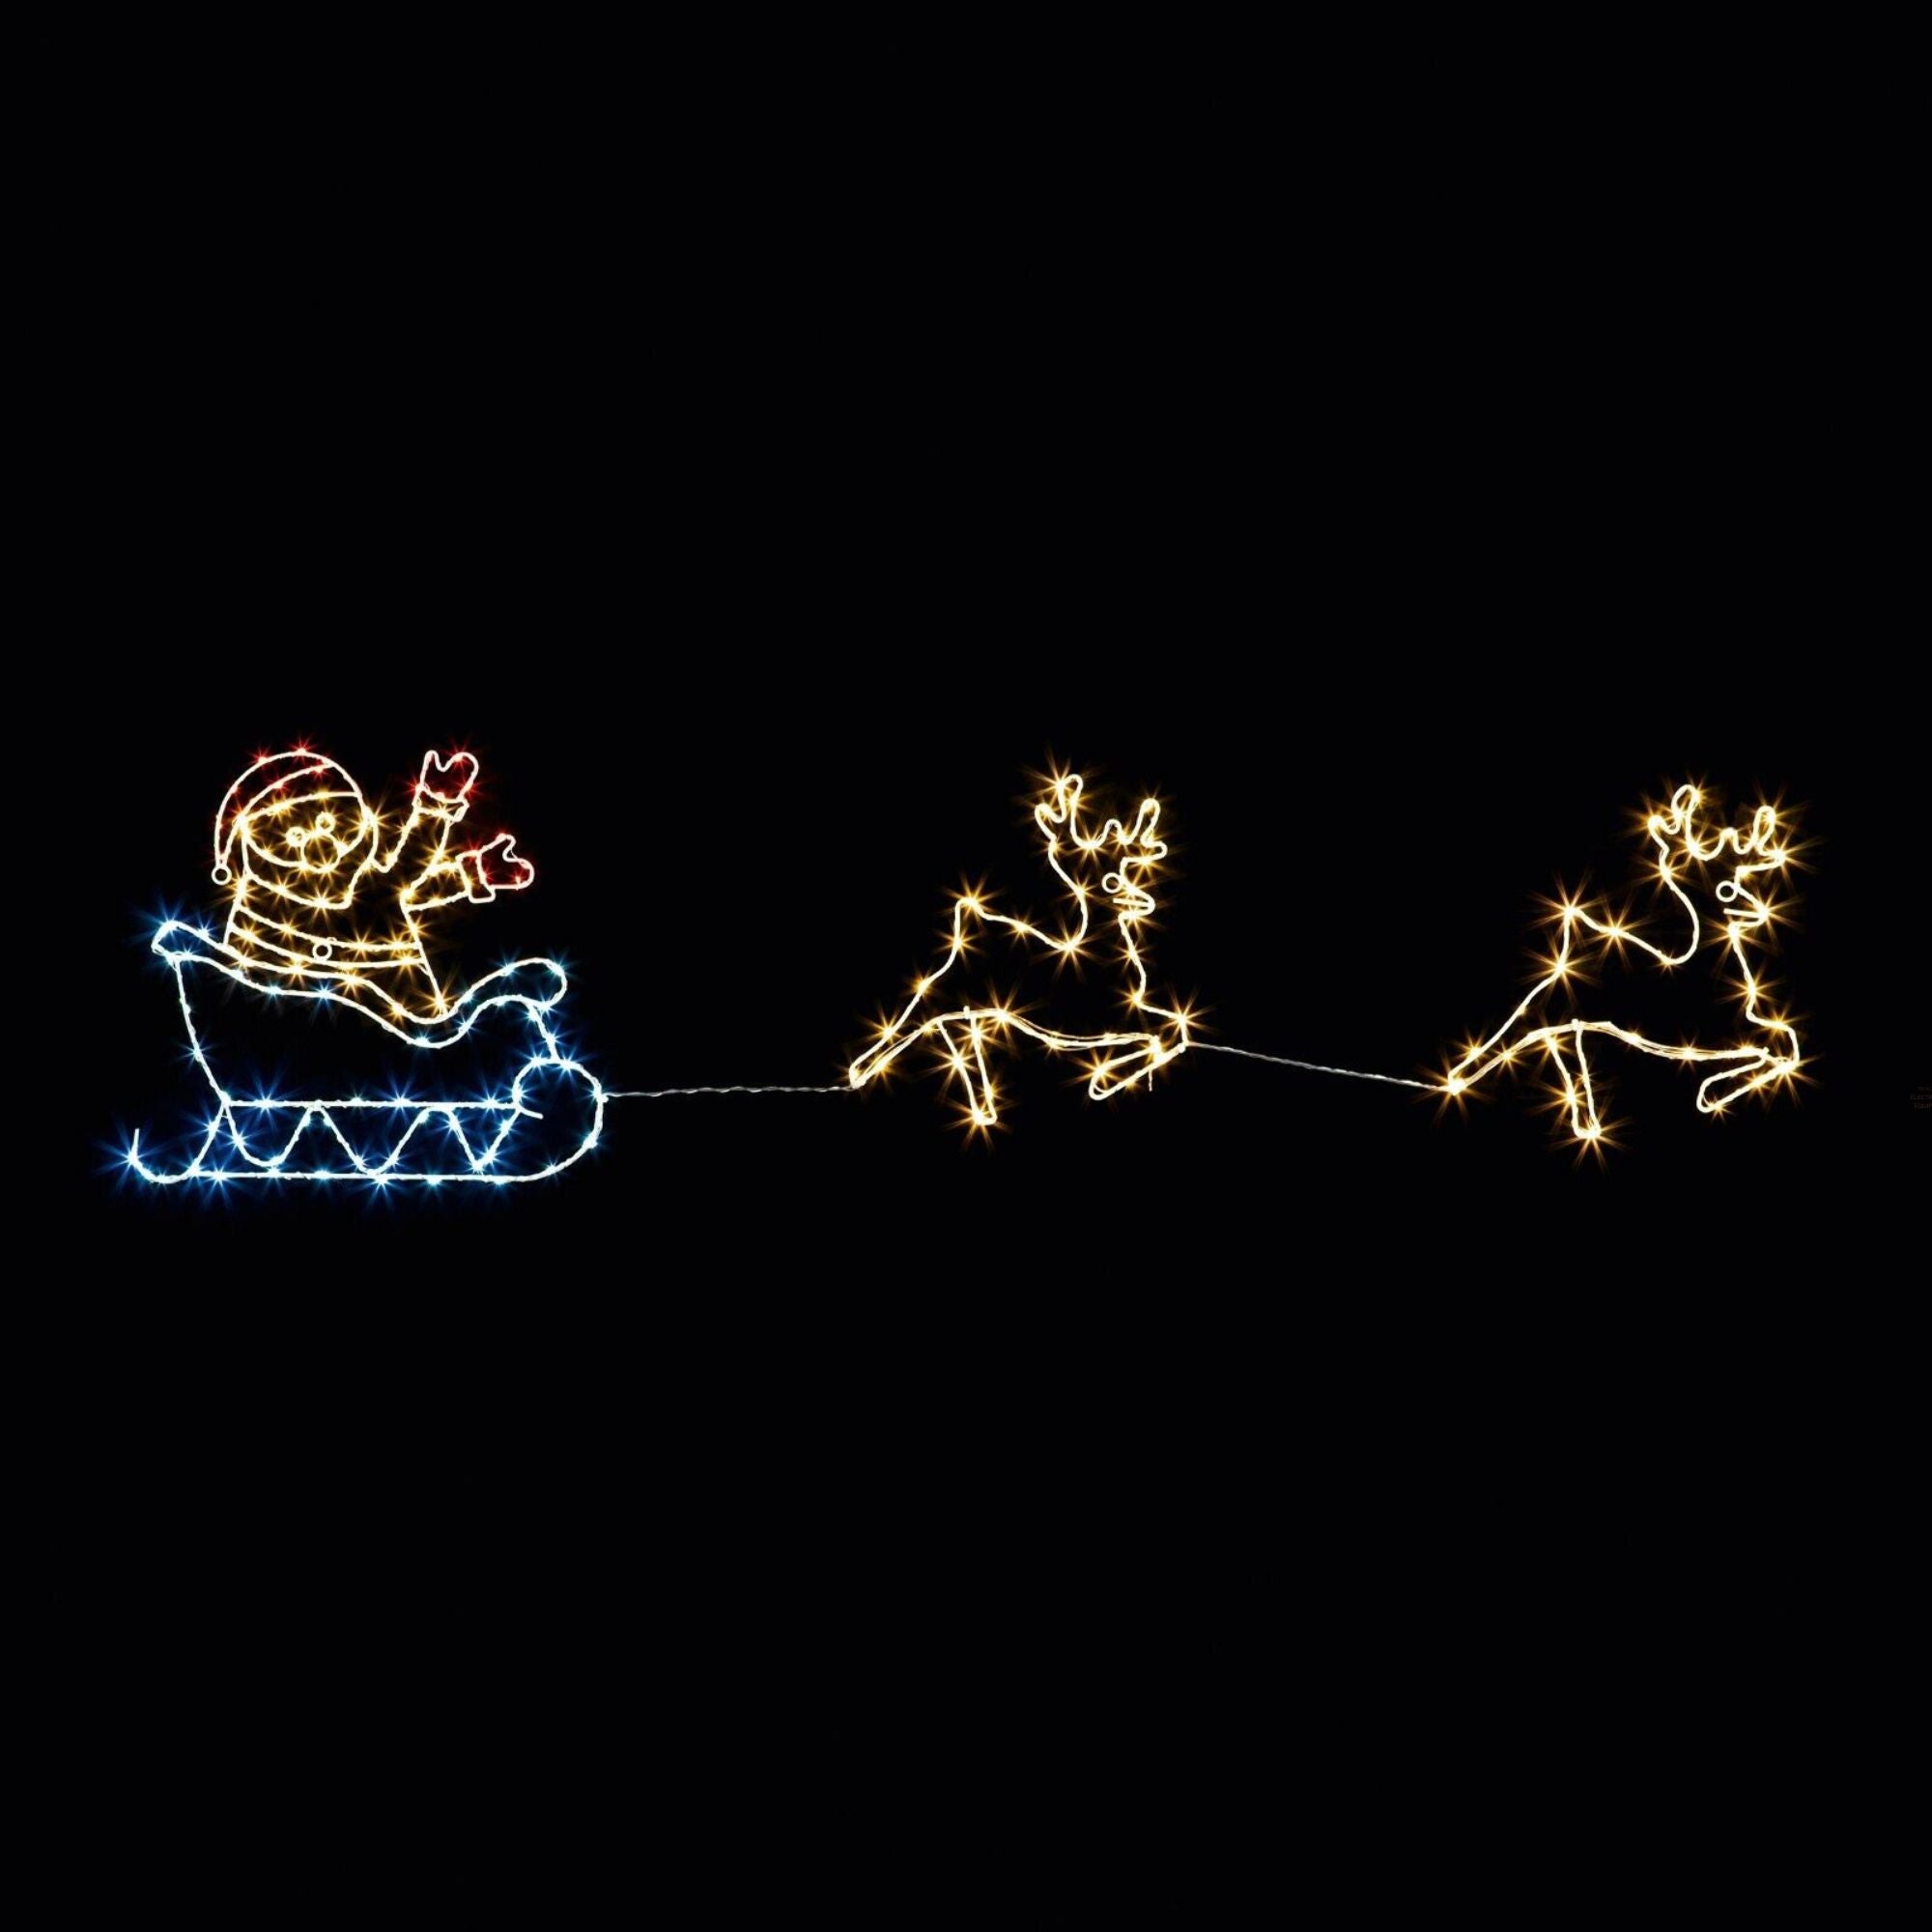 1.2m Flashing Chasing Christmas Santa Sleigh and Reindeer with 190 Red White and Blue Pin Wire LED